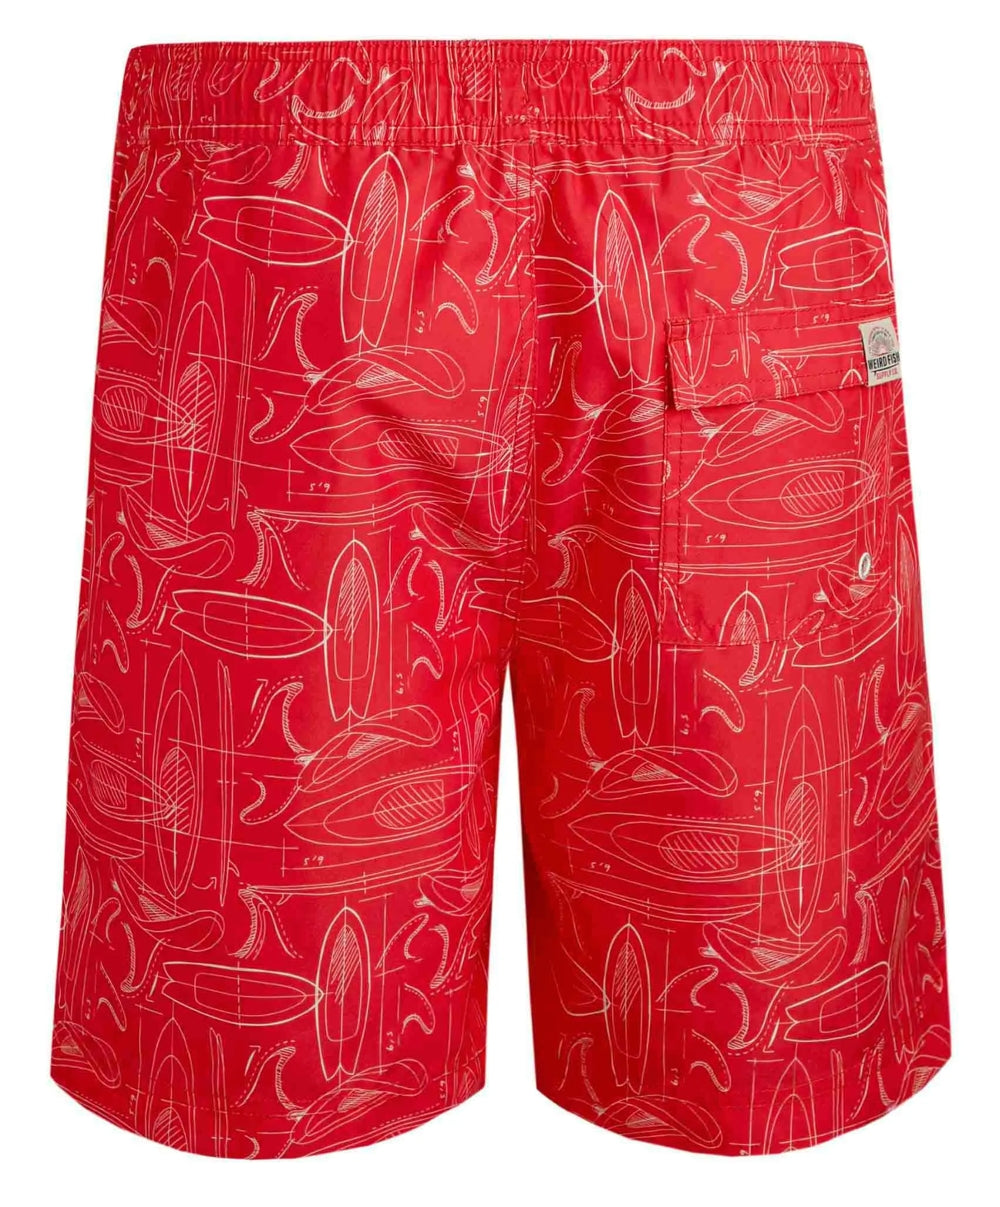 Men's Belukha surf and paddleboard printed swimshorts from Weird Fish in Radical Red.